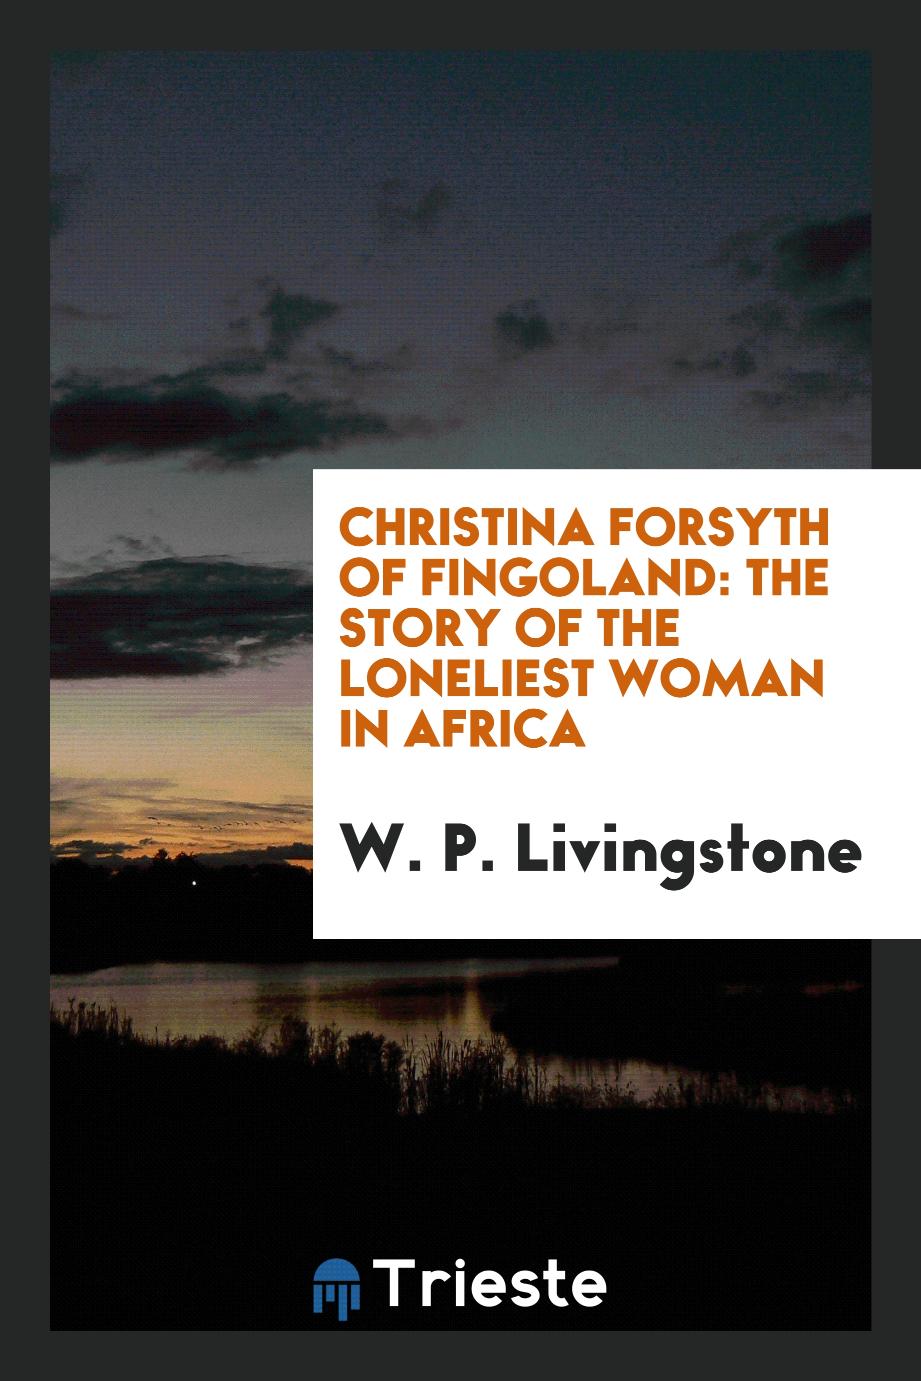 Christina Forsyth of Fingoland: the story of the loneliest woman in Africa